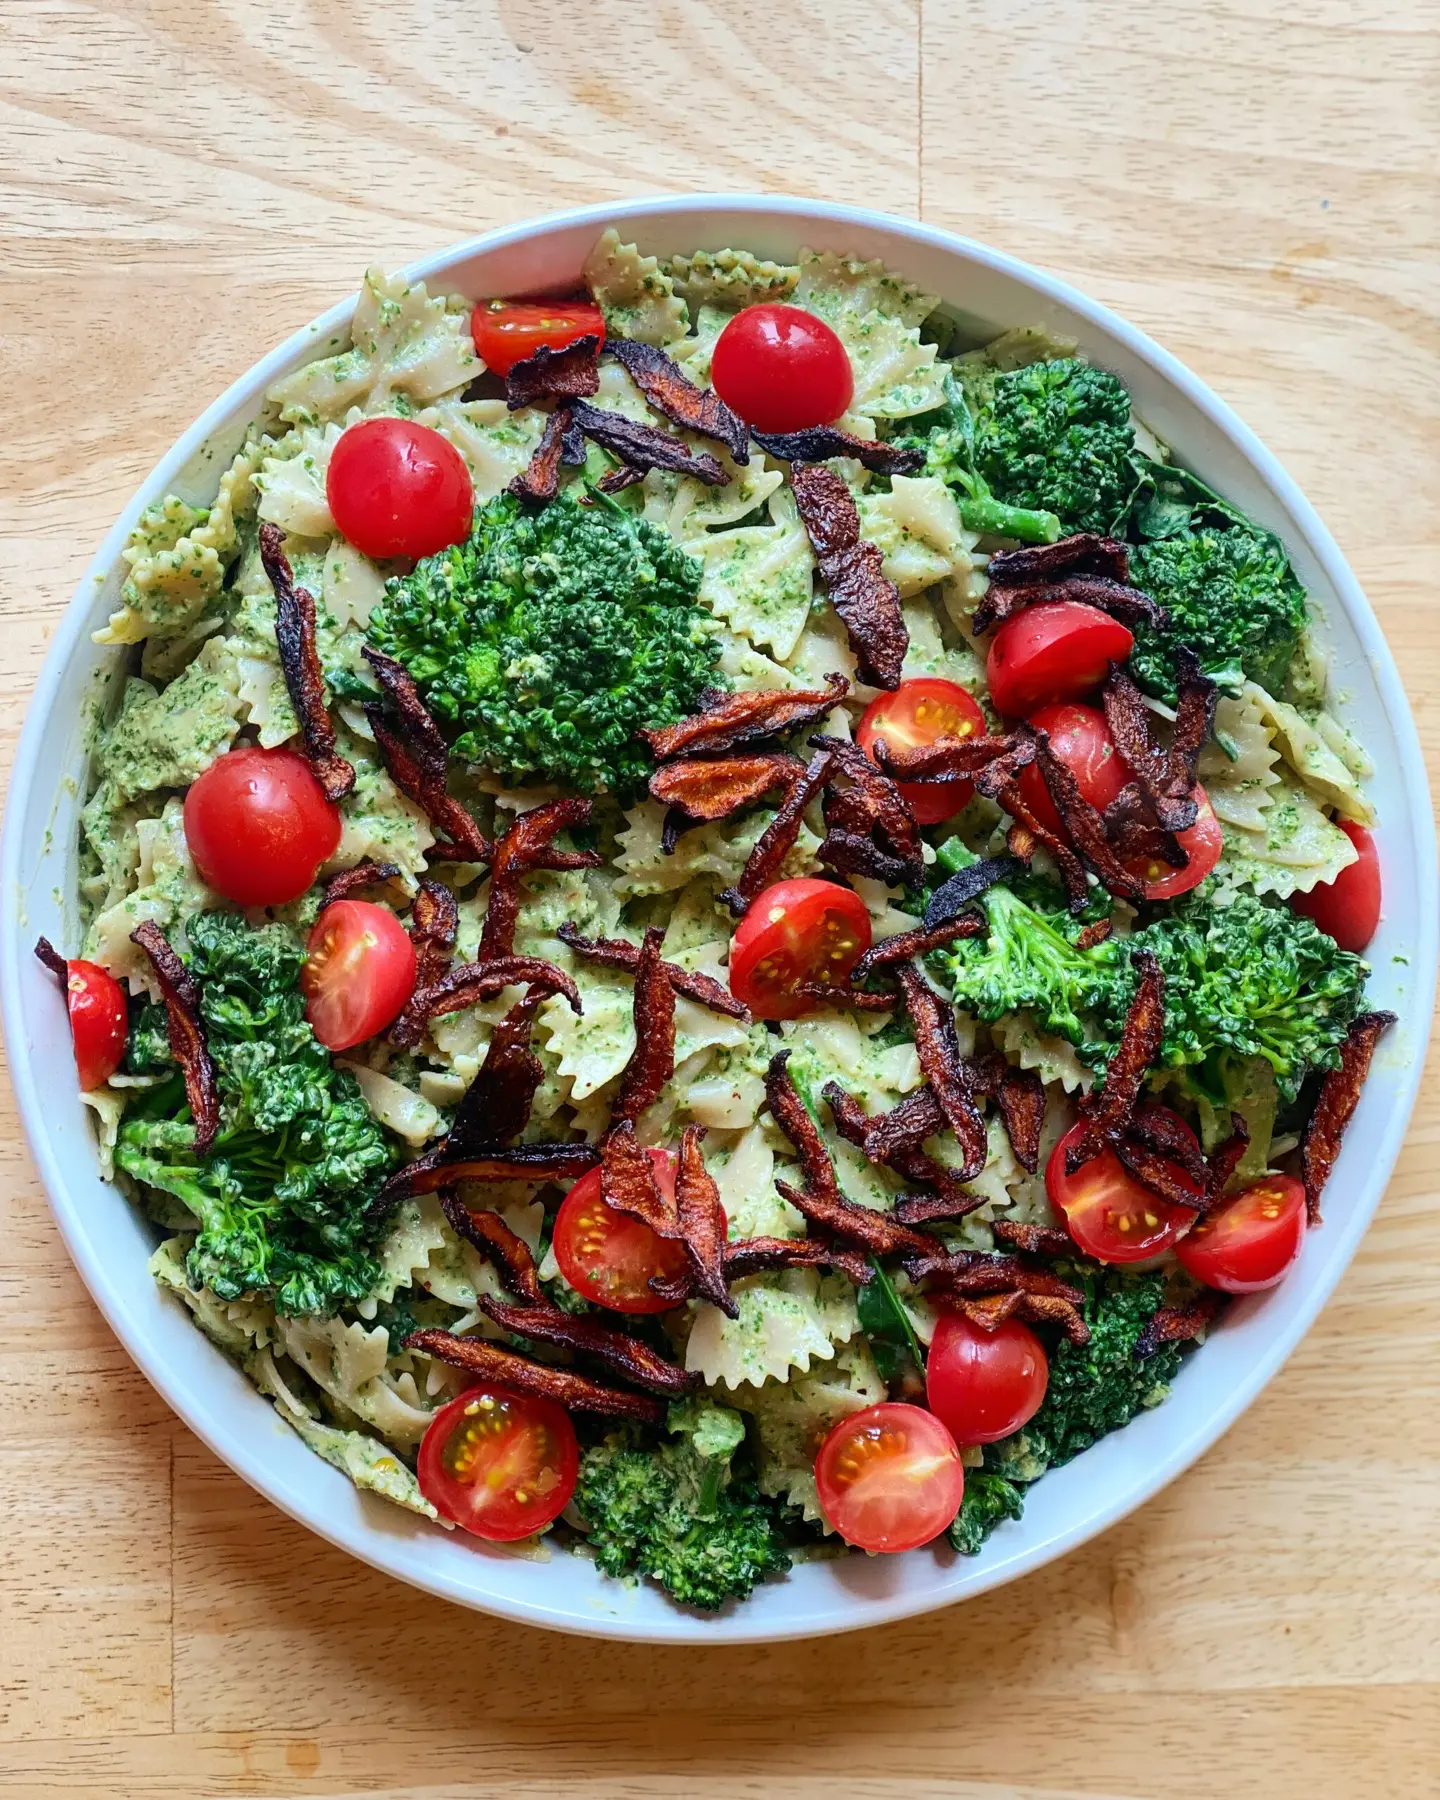 Featured image for “Pasta and Broccoli with Kale Pesto, Cherry Tomatoes, and Shiitake “Bacon””